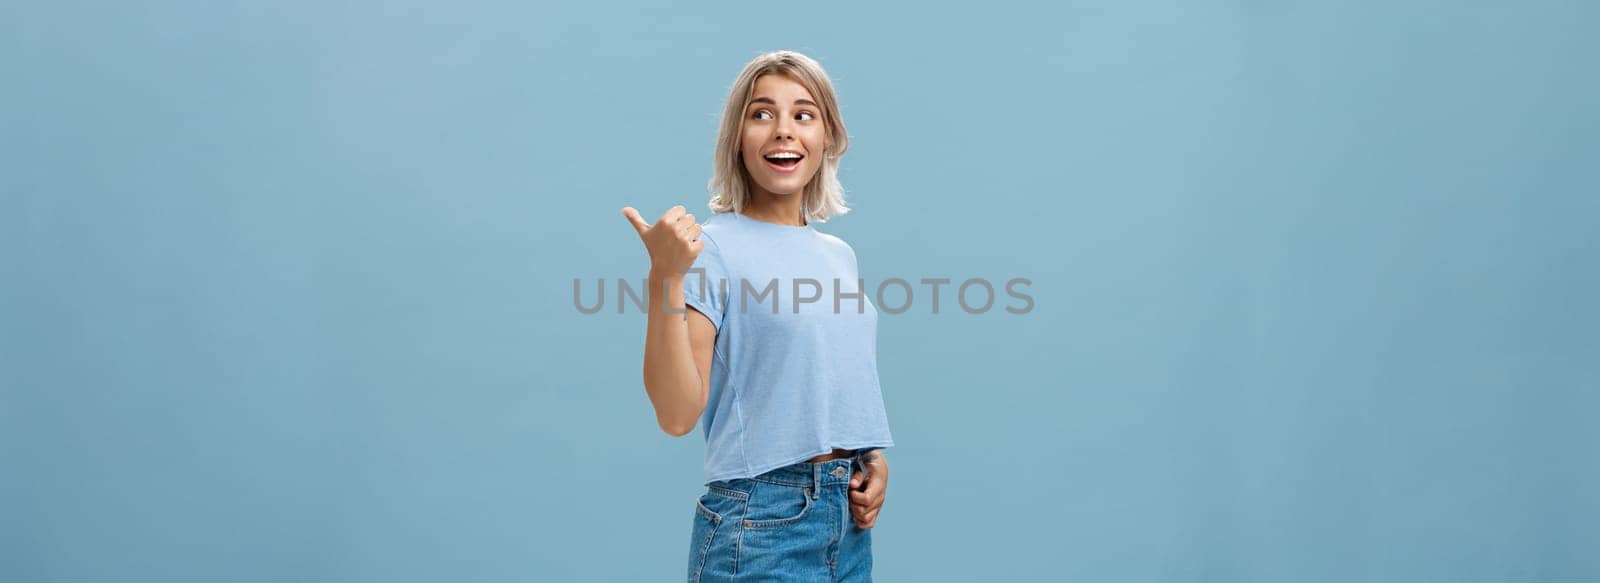 Lifestyle. Charming sociable and friendly stylish female with blond hair turning right to show way or while discussing something talking with relaxed carefree look posing over blue background in trendy outfit.